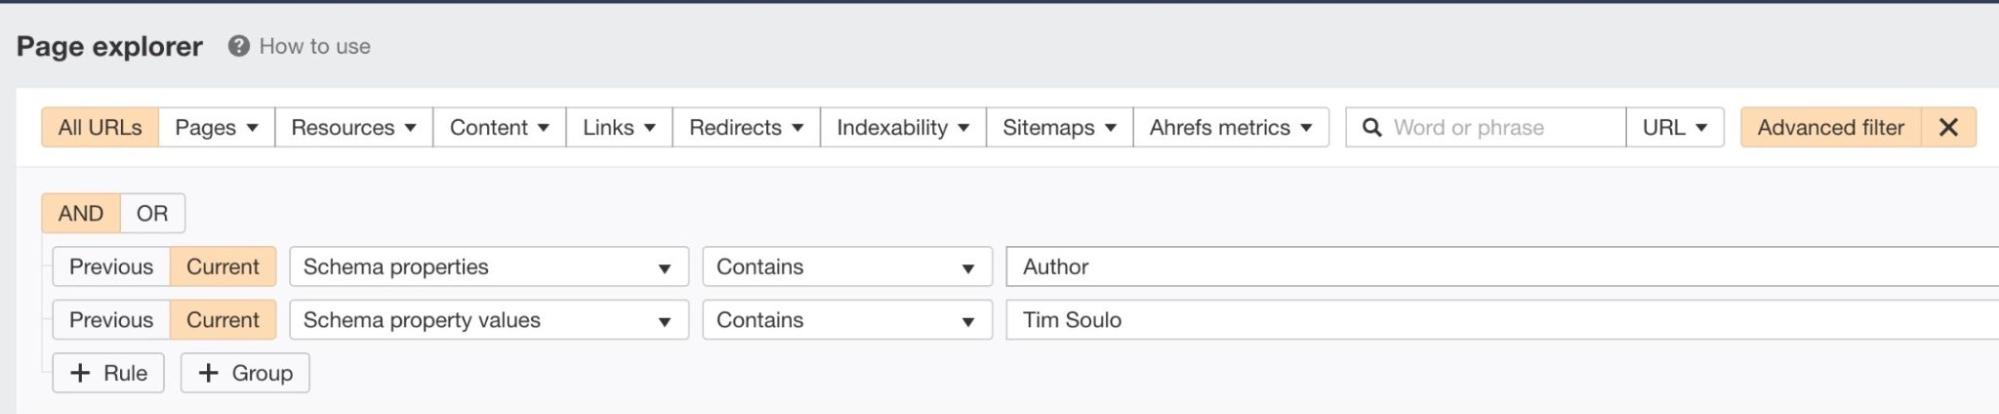 Sample query built in Page Explorer with new fields for structured data properties and their values 